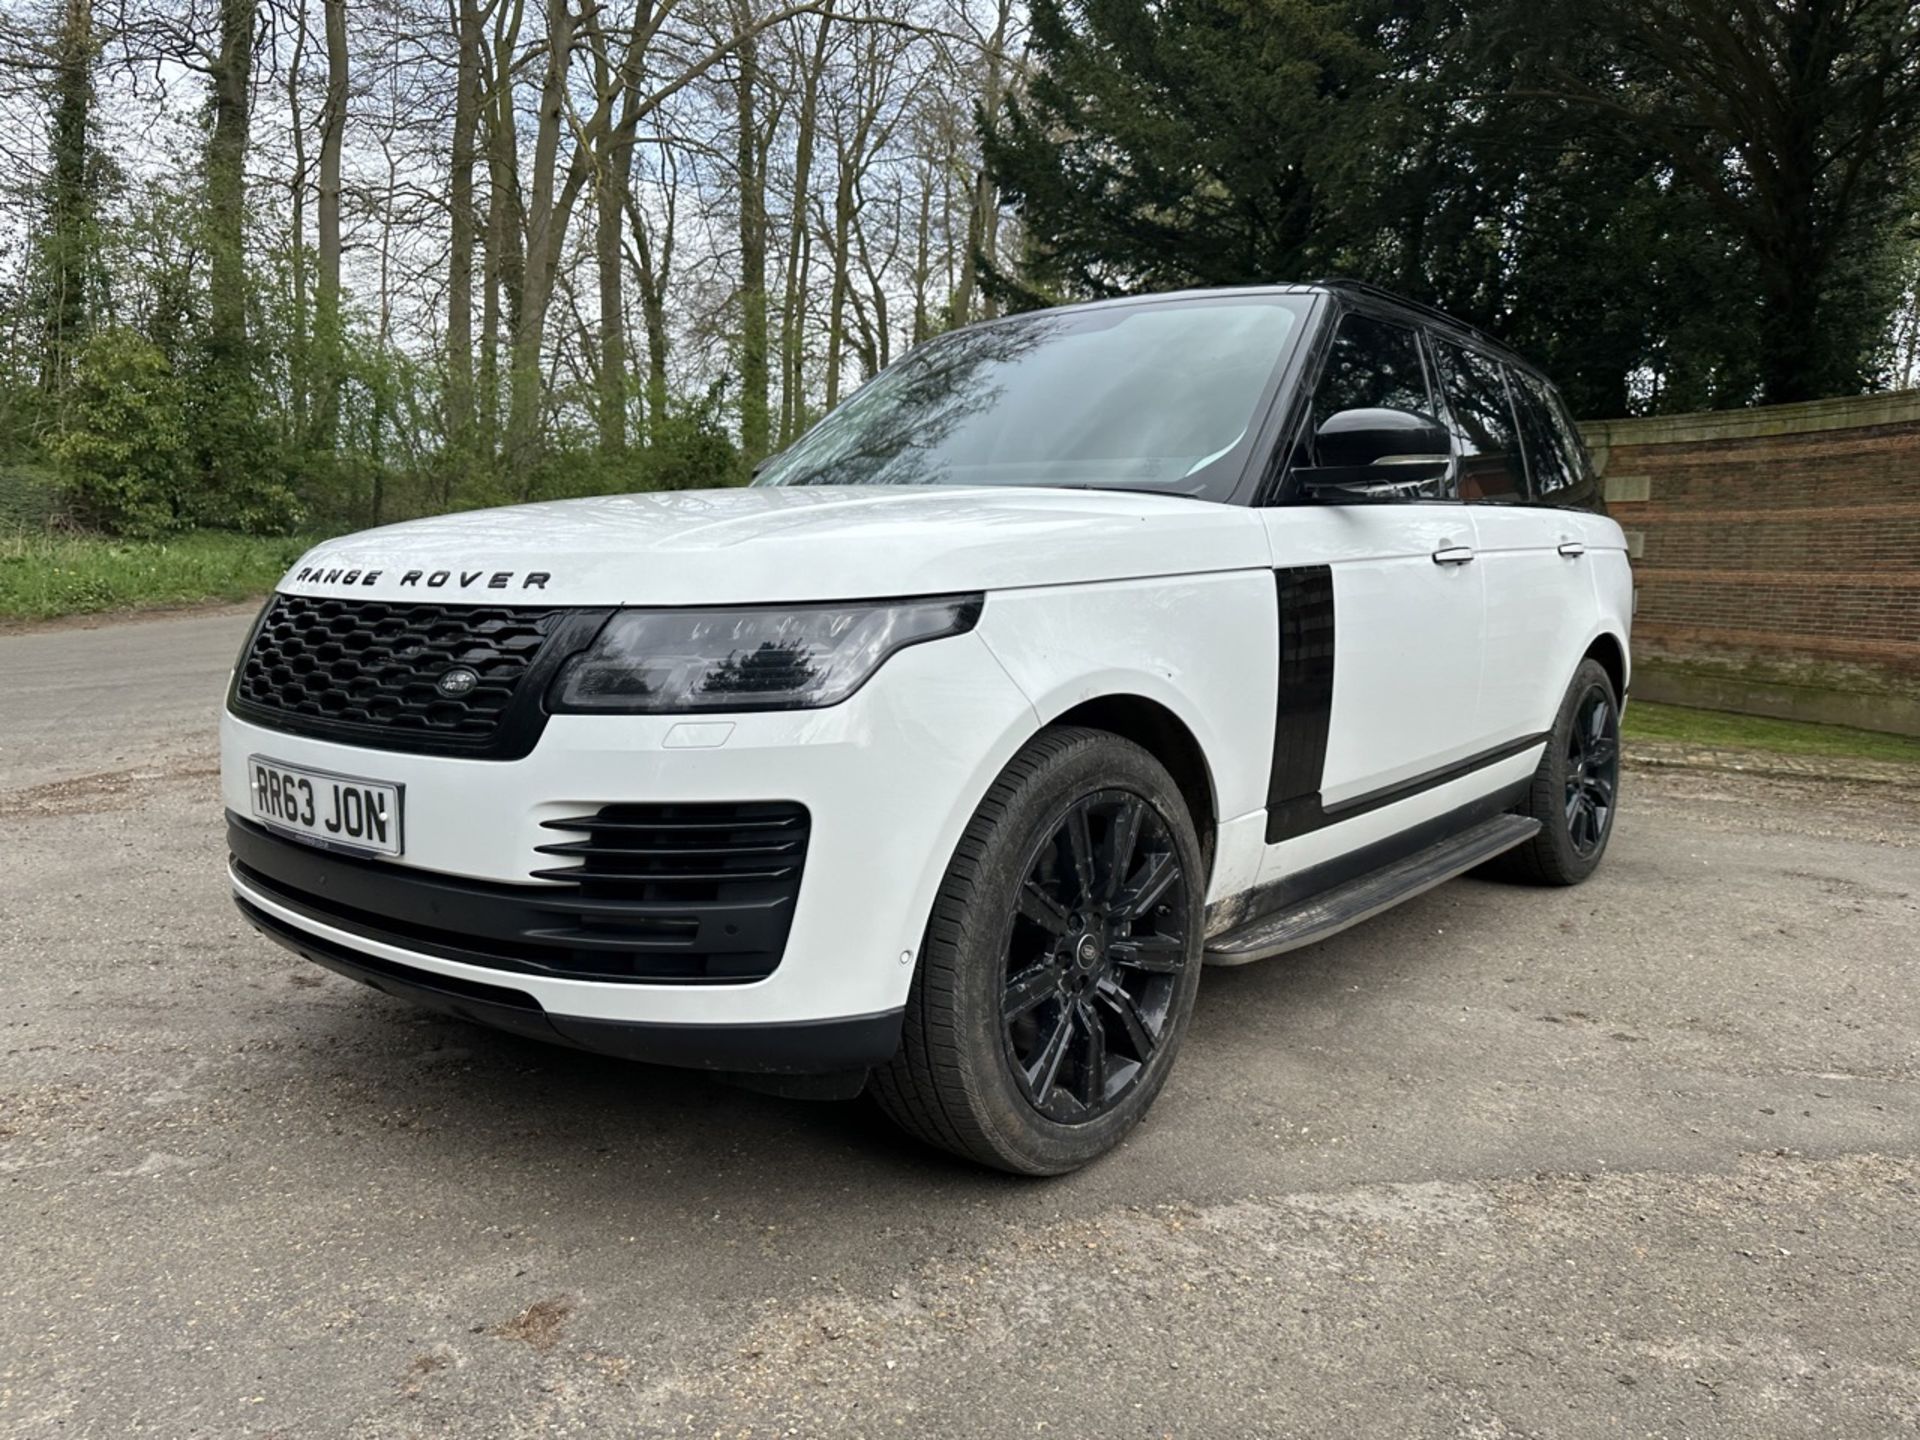 LAND ROVER RANGE ROVER 2.0 P400e Autobiography 4dr Auto - Automatic - 2018 - 31k miles - FULL SH - Image 4 of 17